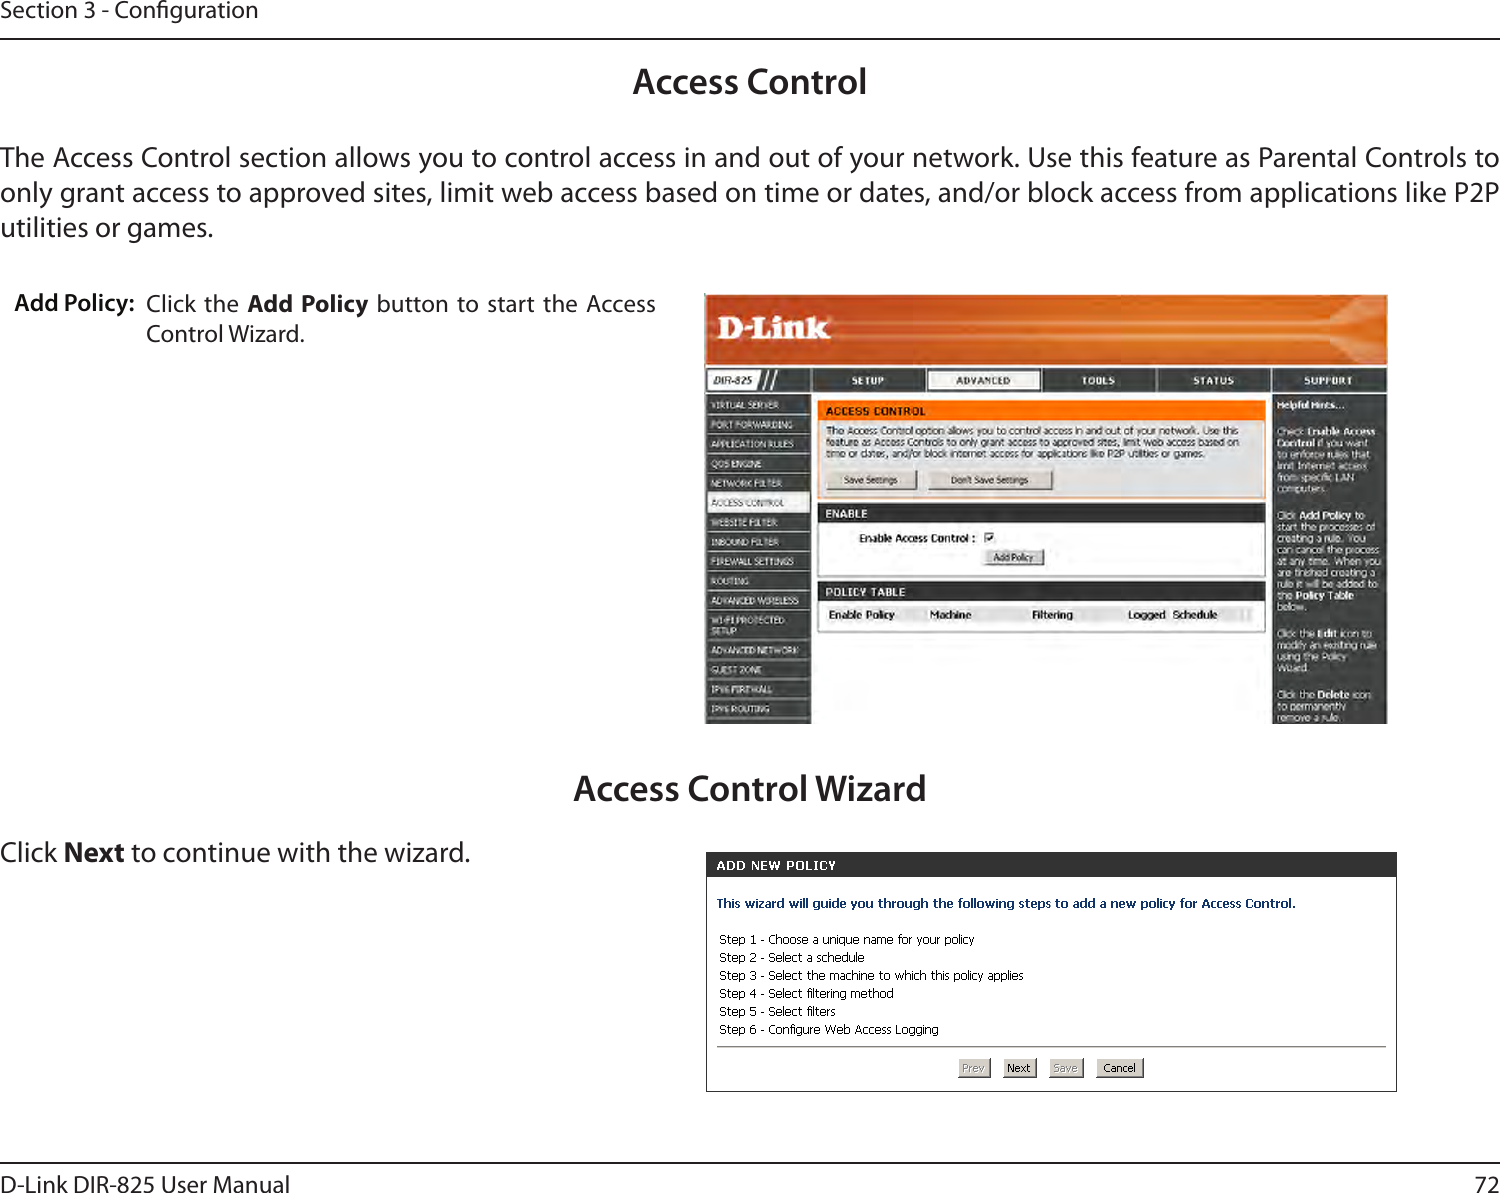 72D-Link DIR-825 User ManualSection 3 - CongurationAccess ControlClick the  Add Policy button  to start the  Access Control Wizard. Add Policy:The Access Control section allows you to control access in and out of your network. Use this feature as Parental Controls to only grant access to approved sites, limit web access based on time or dates, and/or block access from applications like P2P utilities or games.Click Next to continue with the wizard.Access Control Wizard